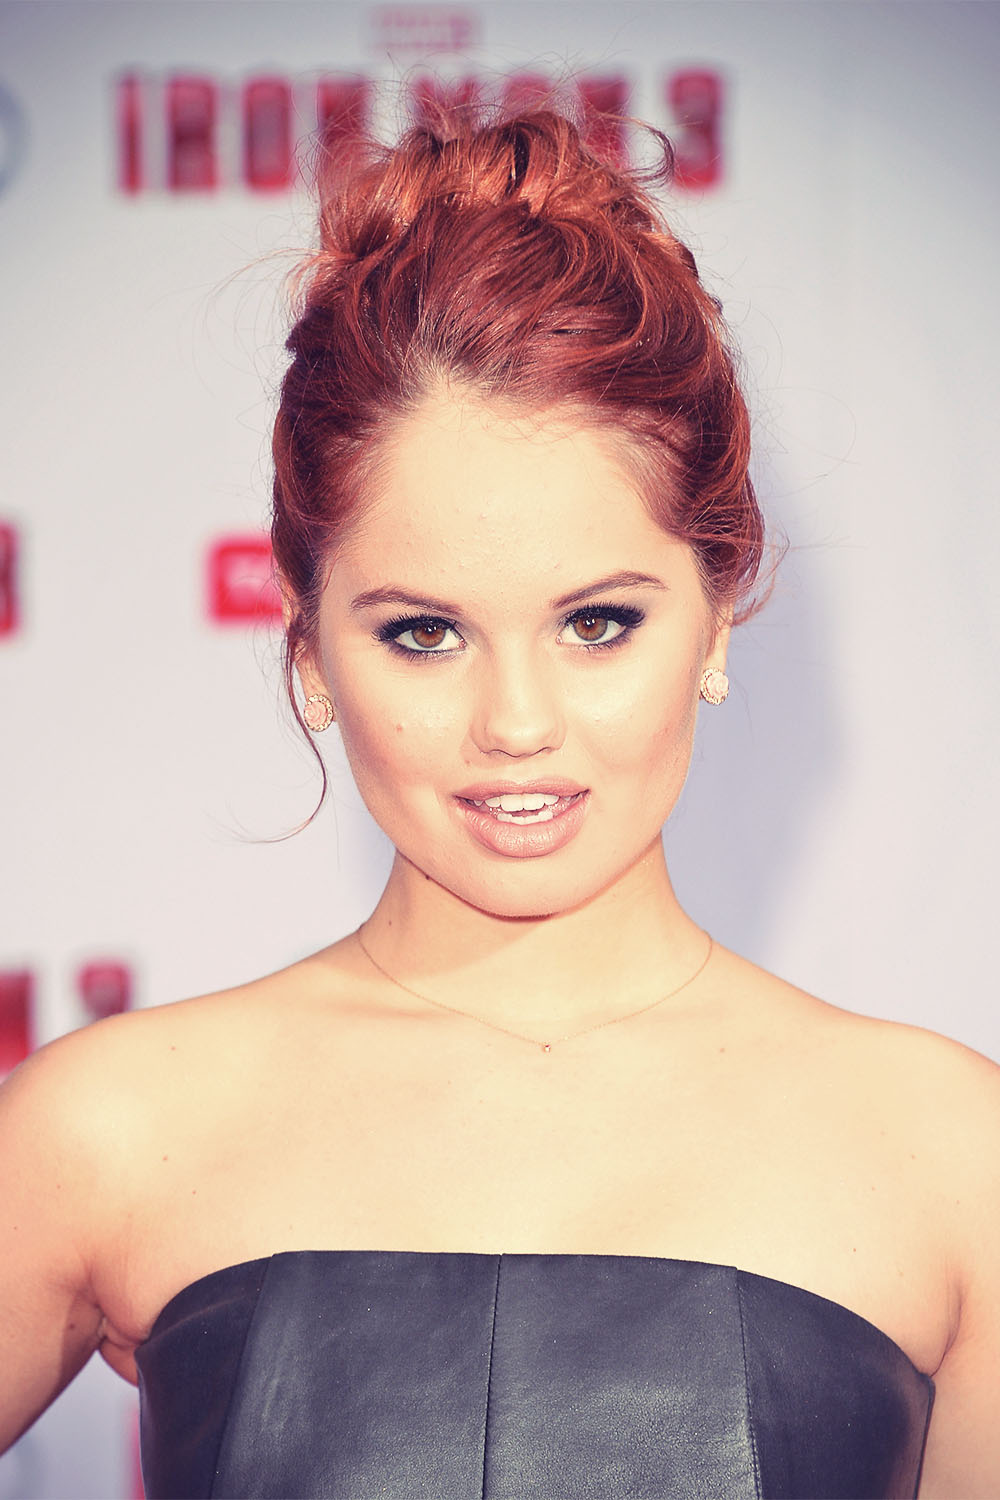 Debby Ryan attends Premiere of Walt Disney Pictures Iron Man 3